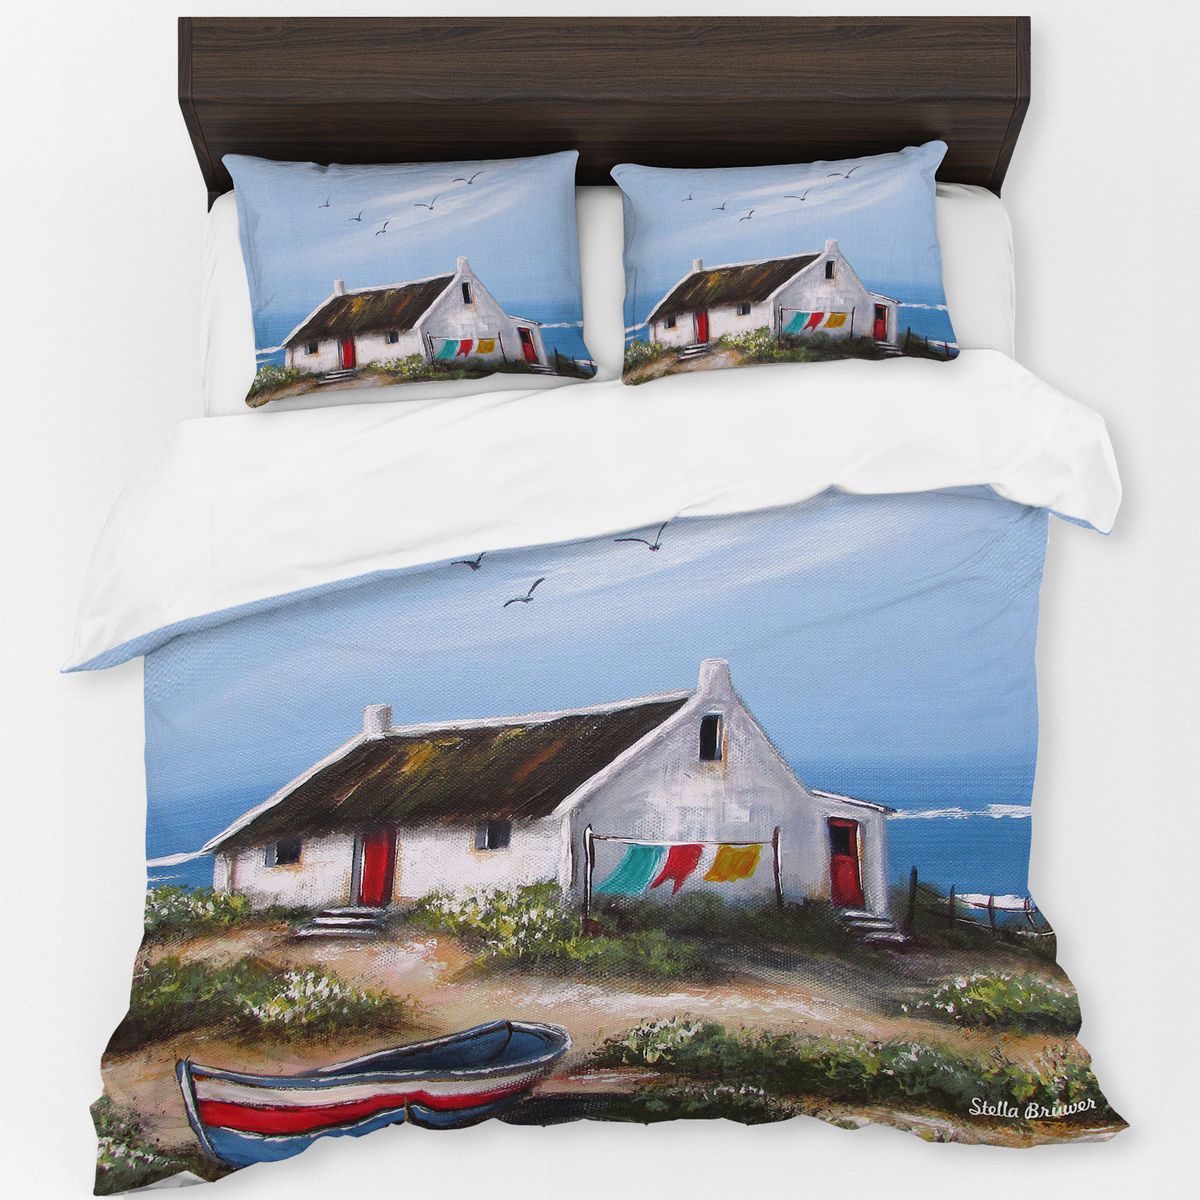 Living By The Sea By Stella Bruwer Duvet Cover Set